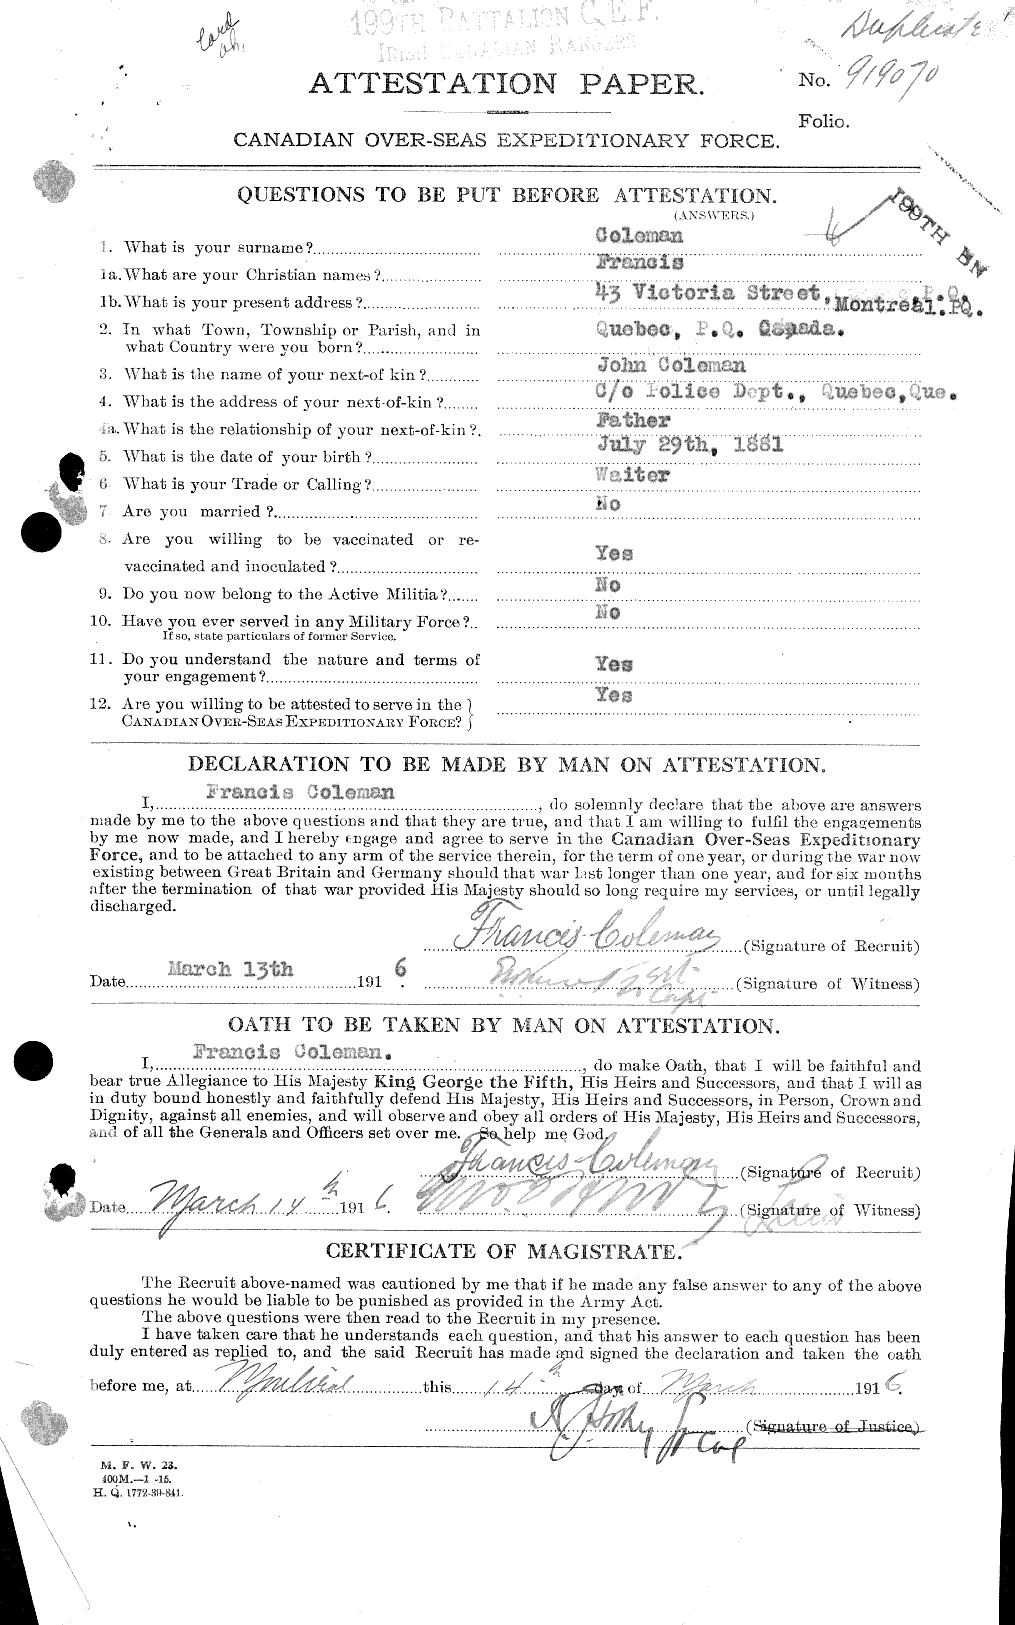 Personnel Records of the First World War - CEF 028125a